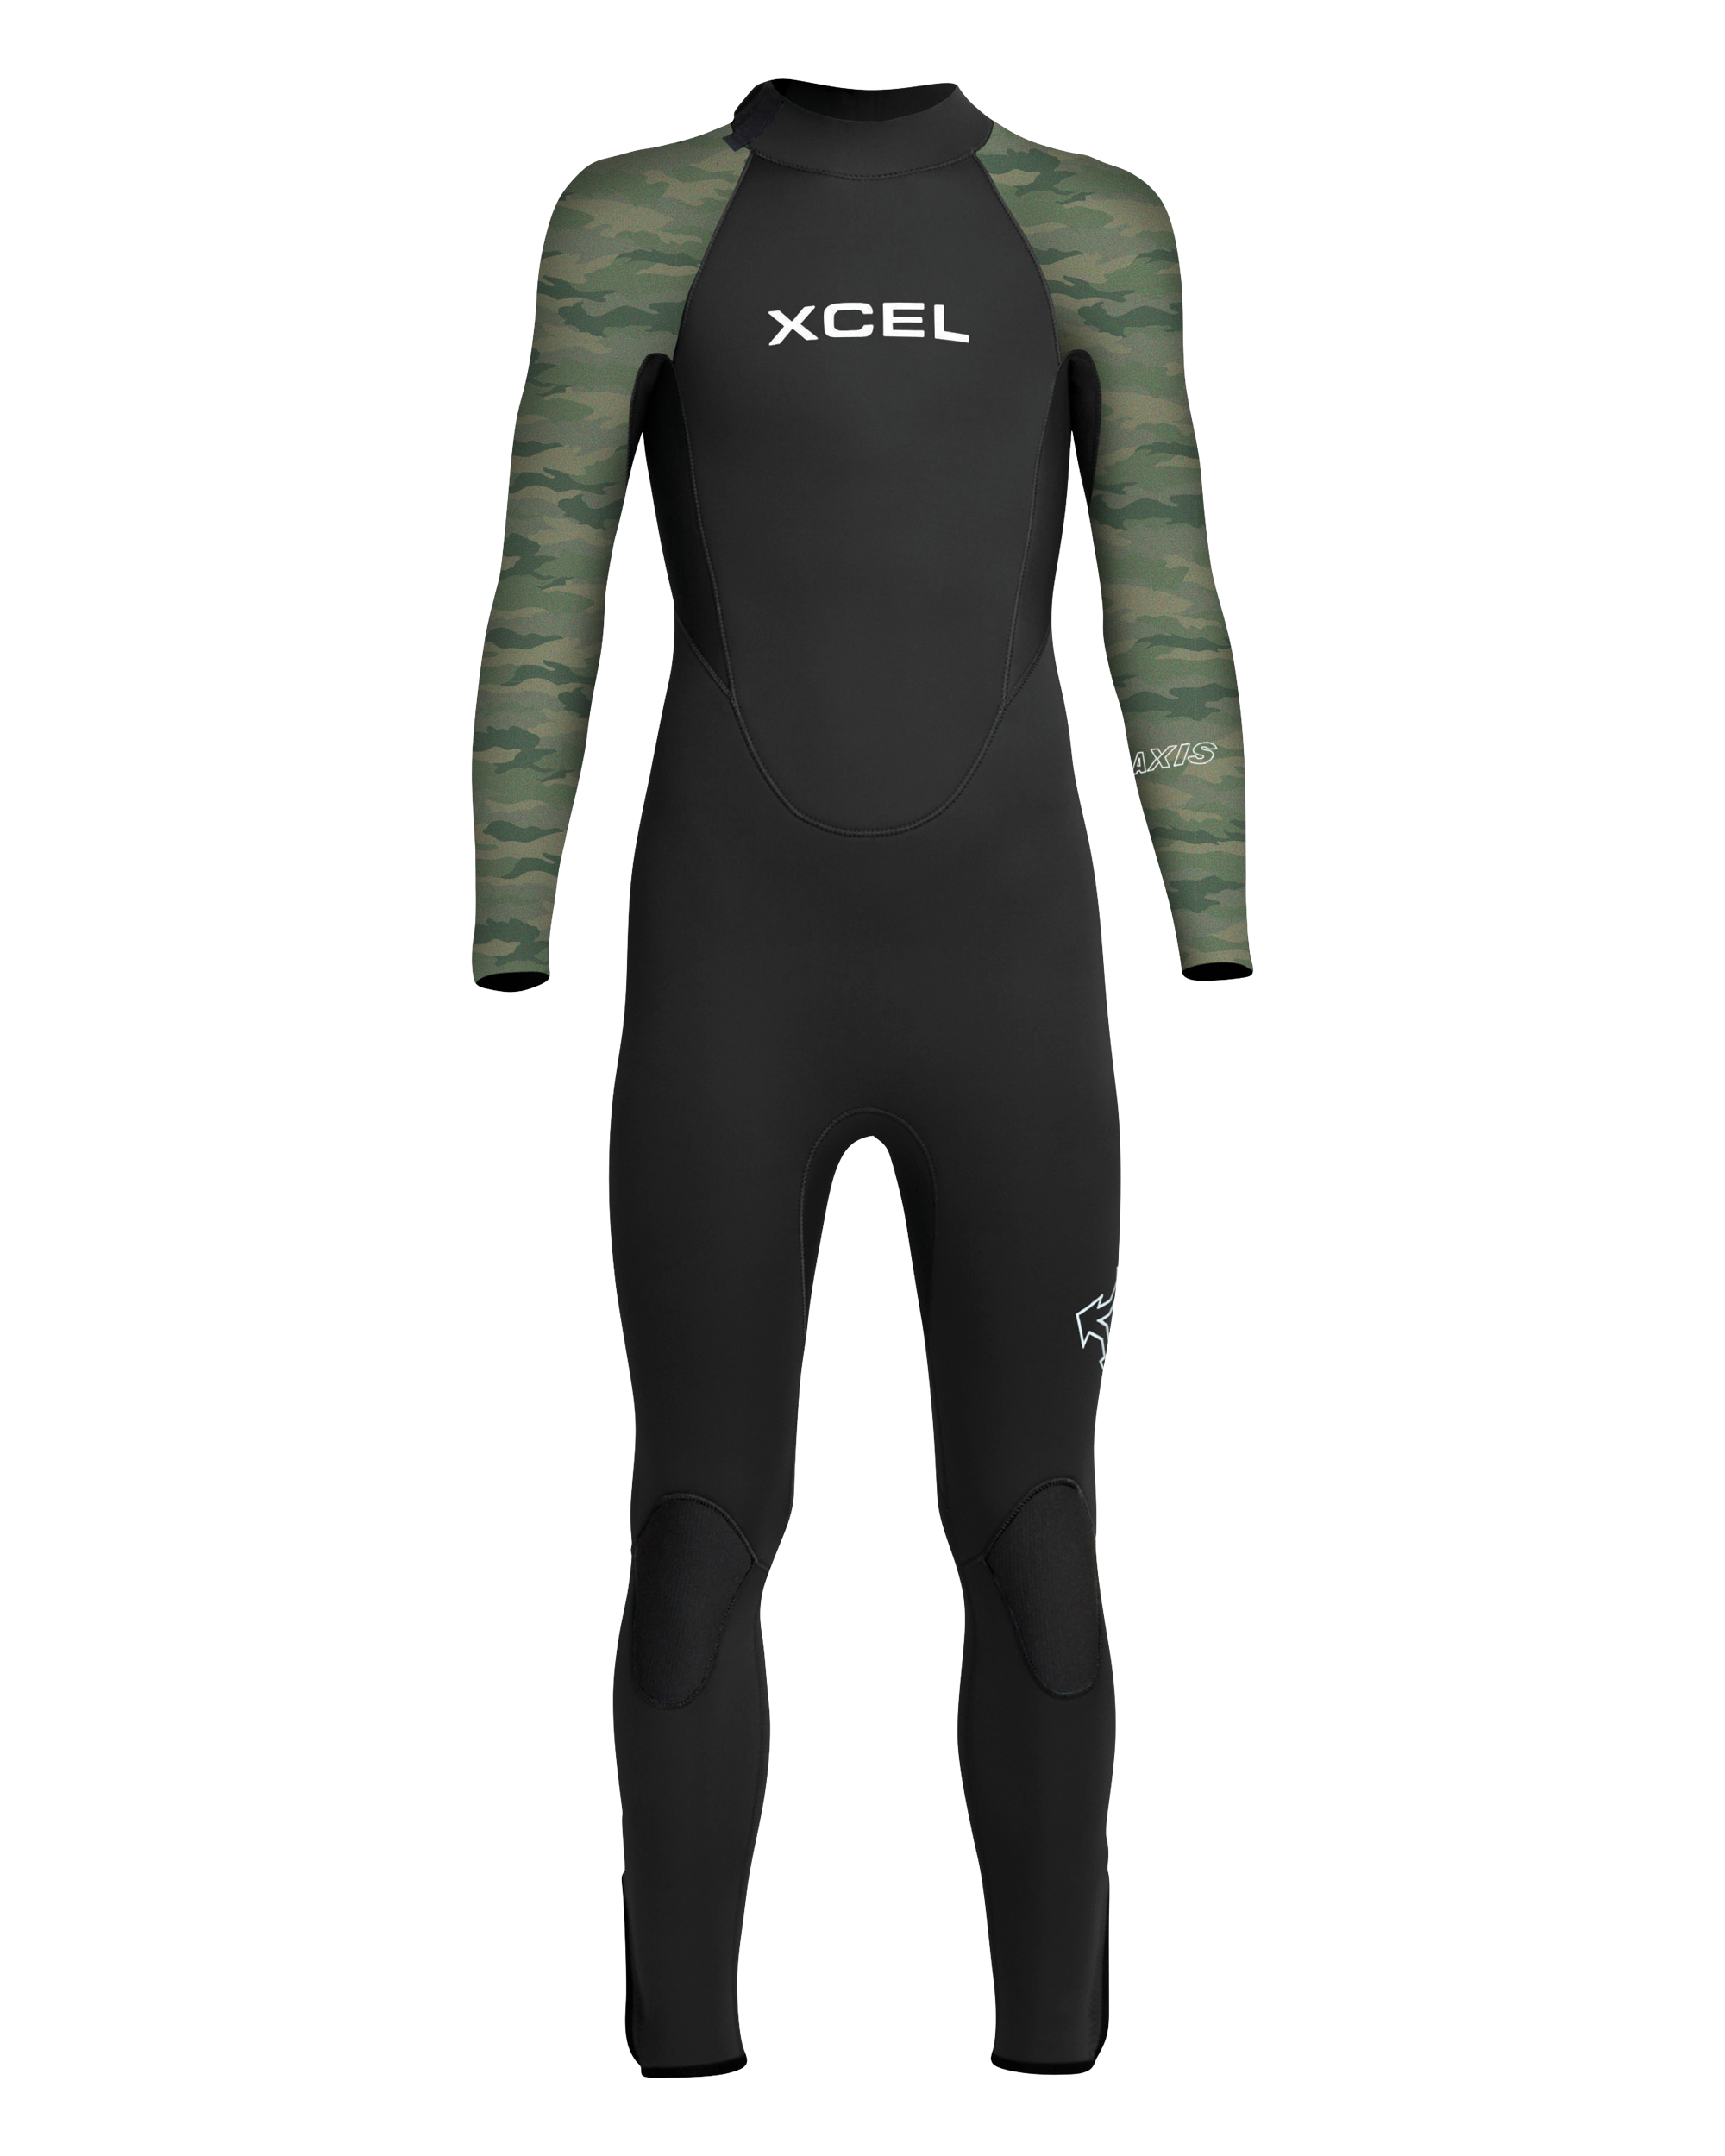 XCEL YOUTH AXIS 3/2MM BACK ZIP WETSUIT - BLACK/GREEN CAMO - Board Store XcelWetsuits  